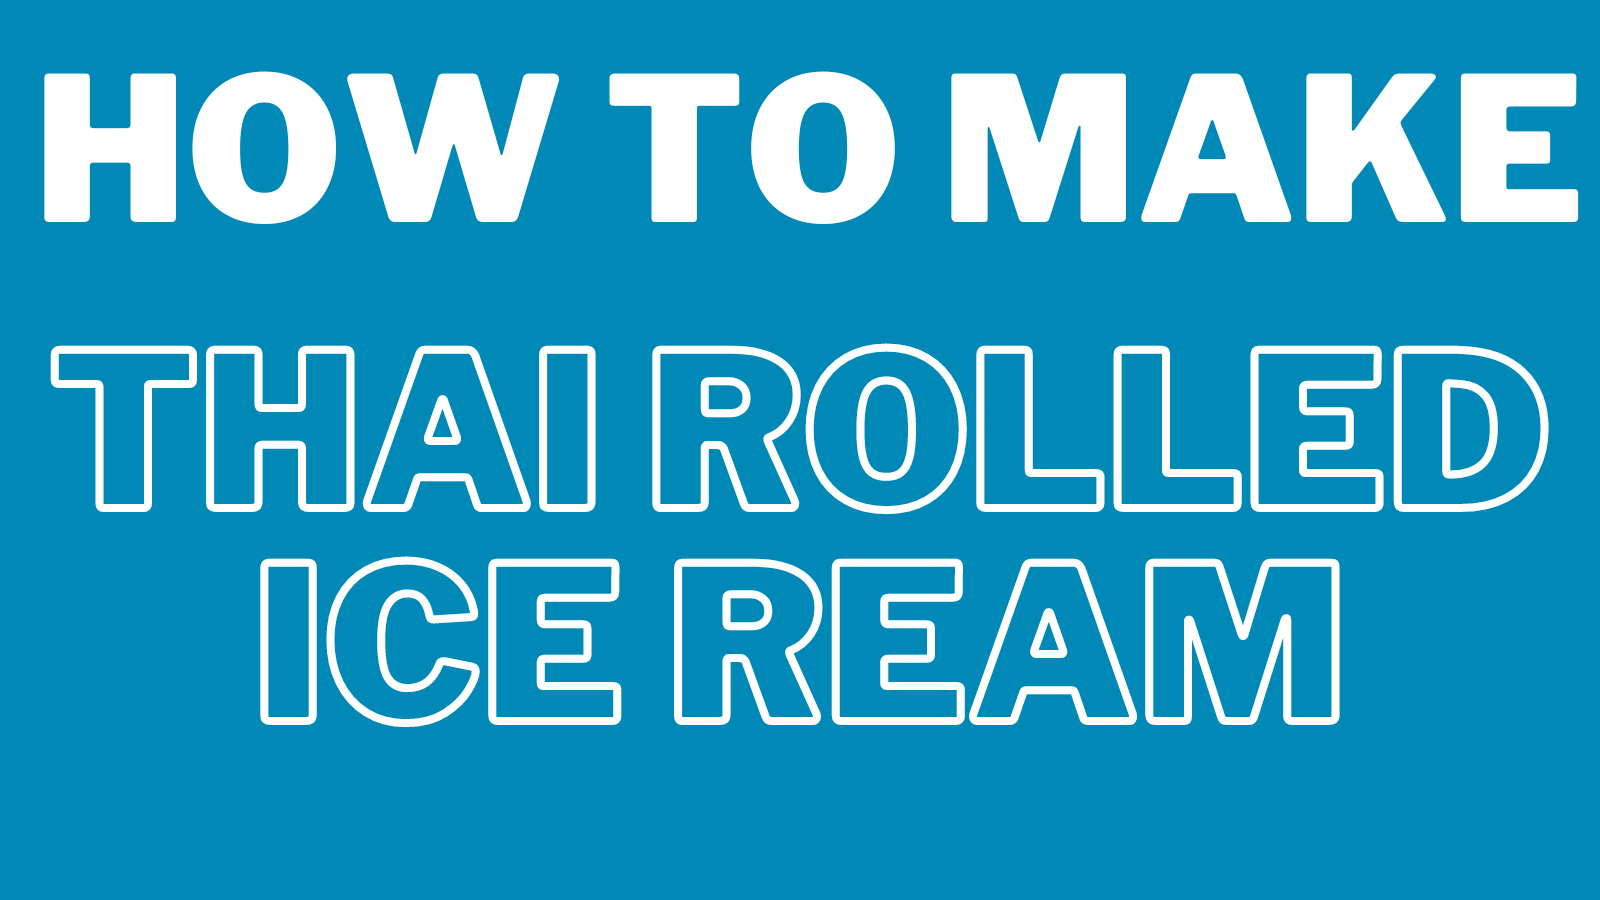 how to make thai rolled ice cream